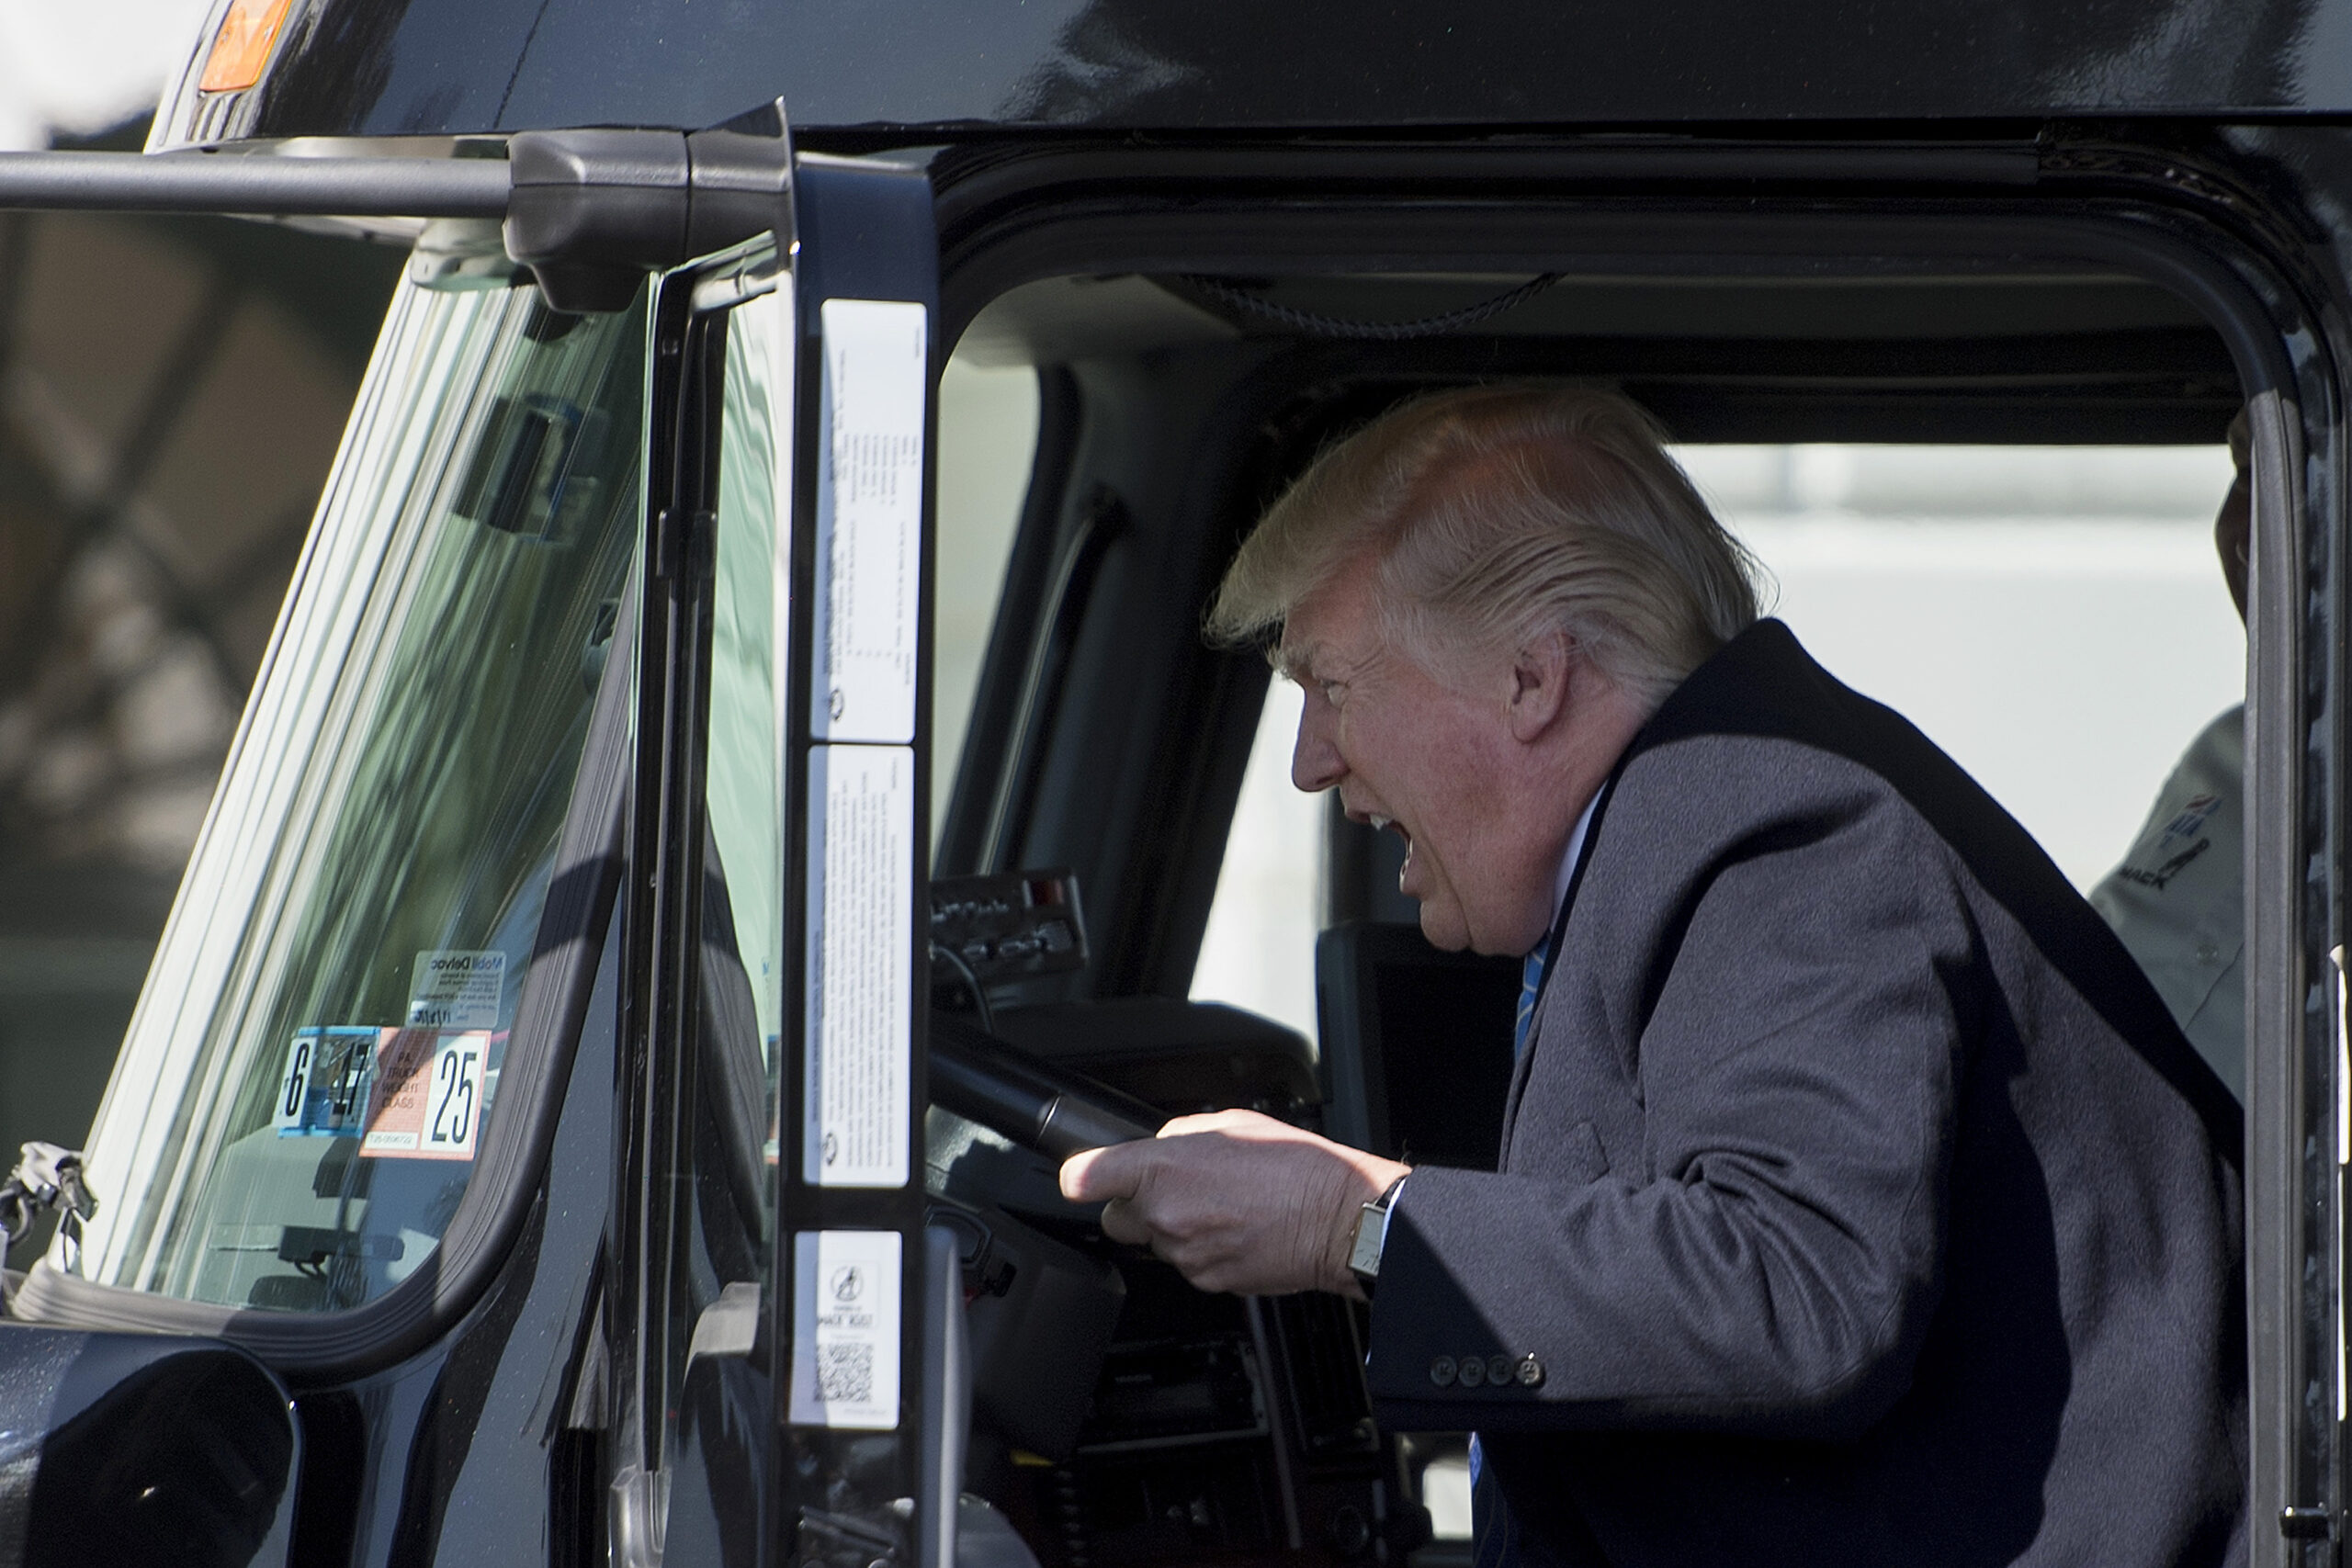 Trump shouting in a truck